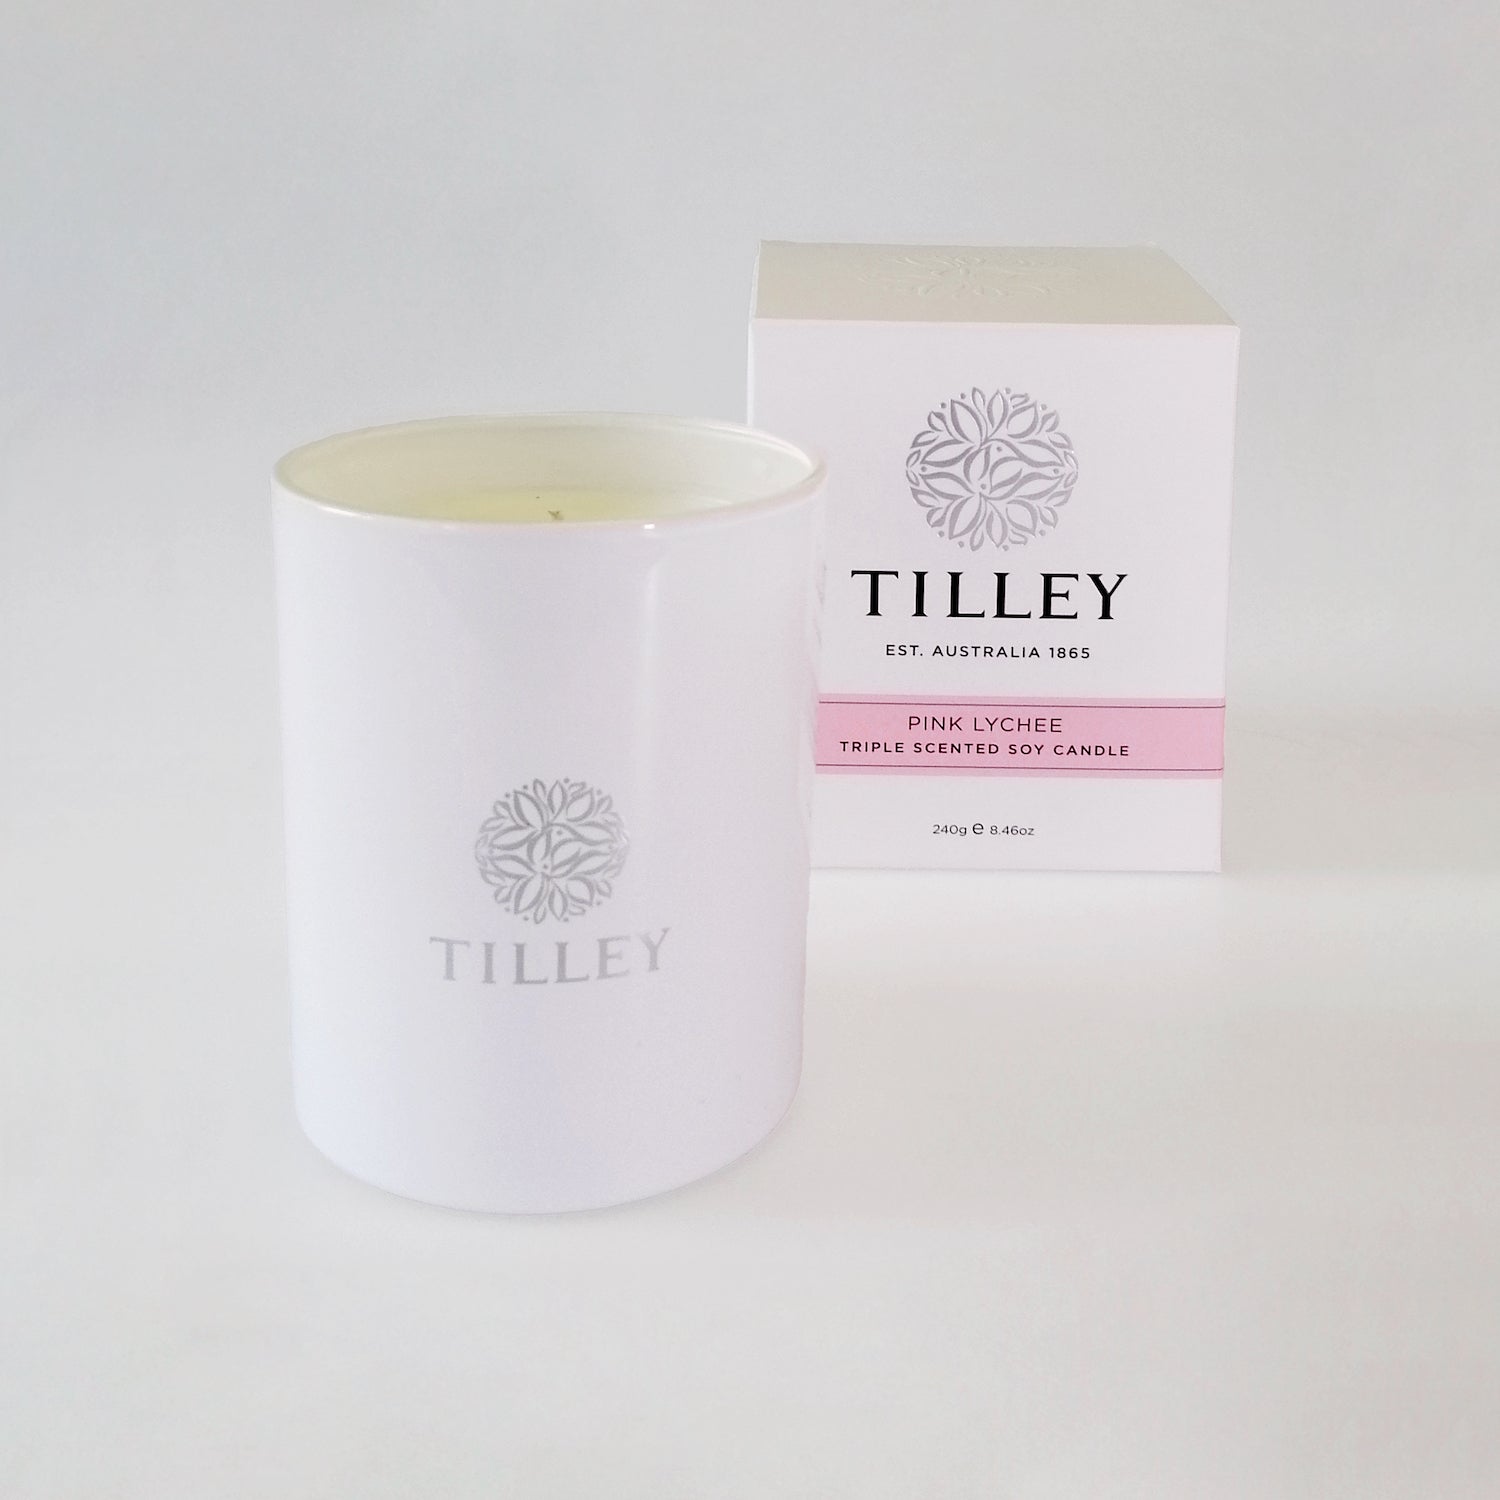 Tilley Soy Scented Candle - Pink Lychee